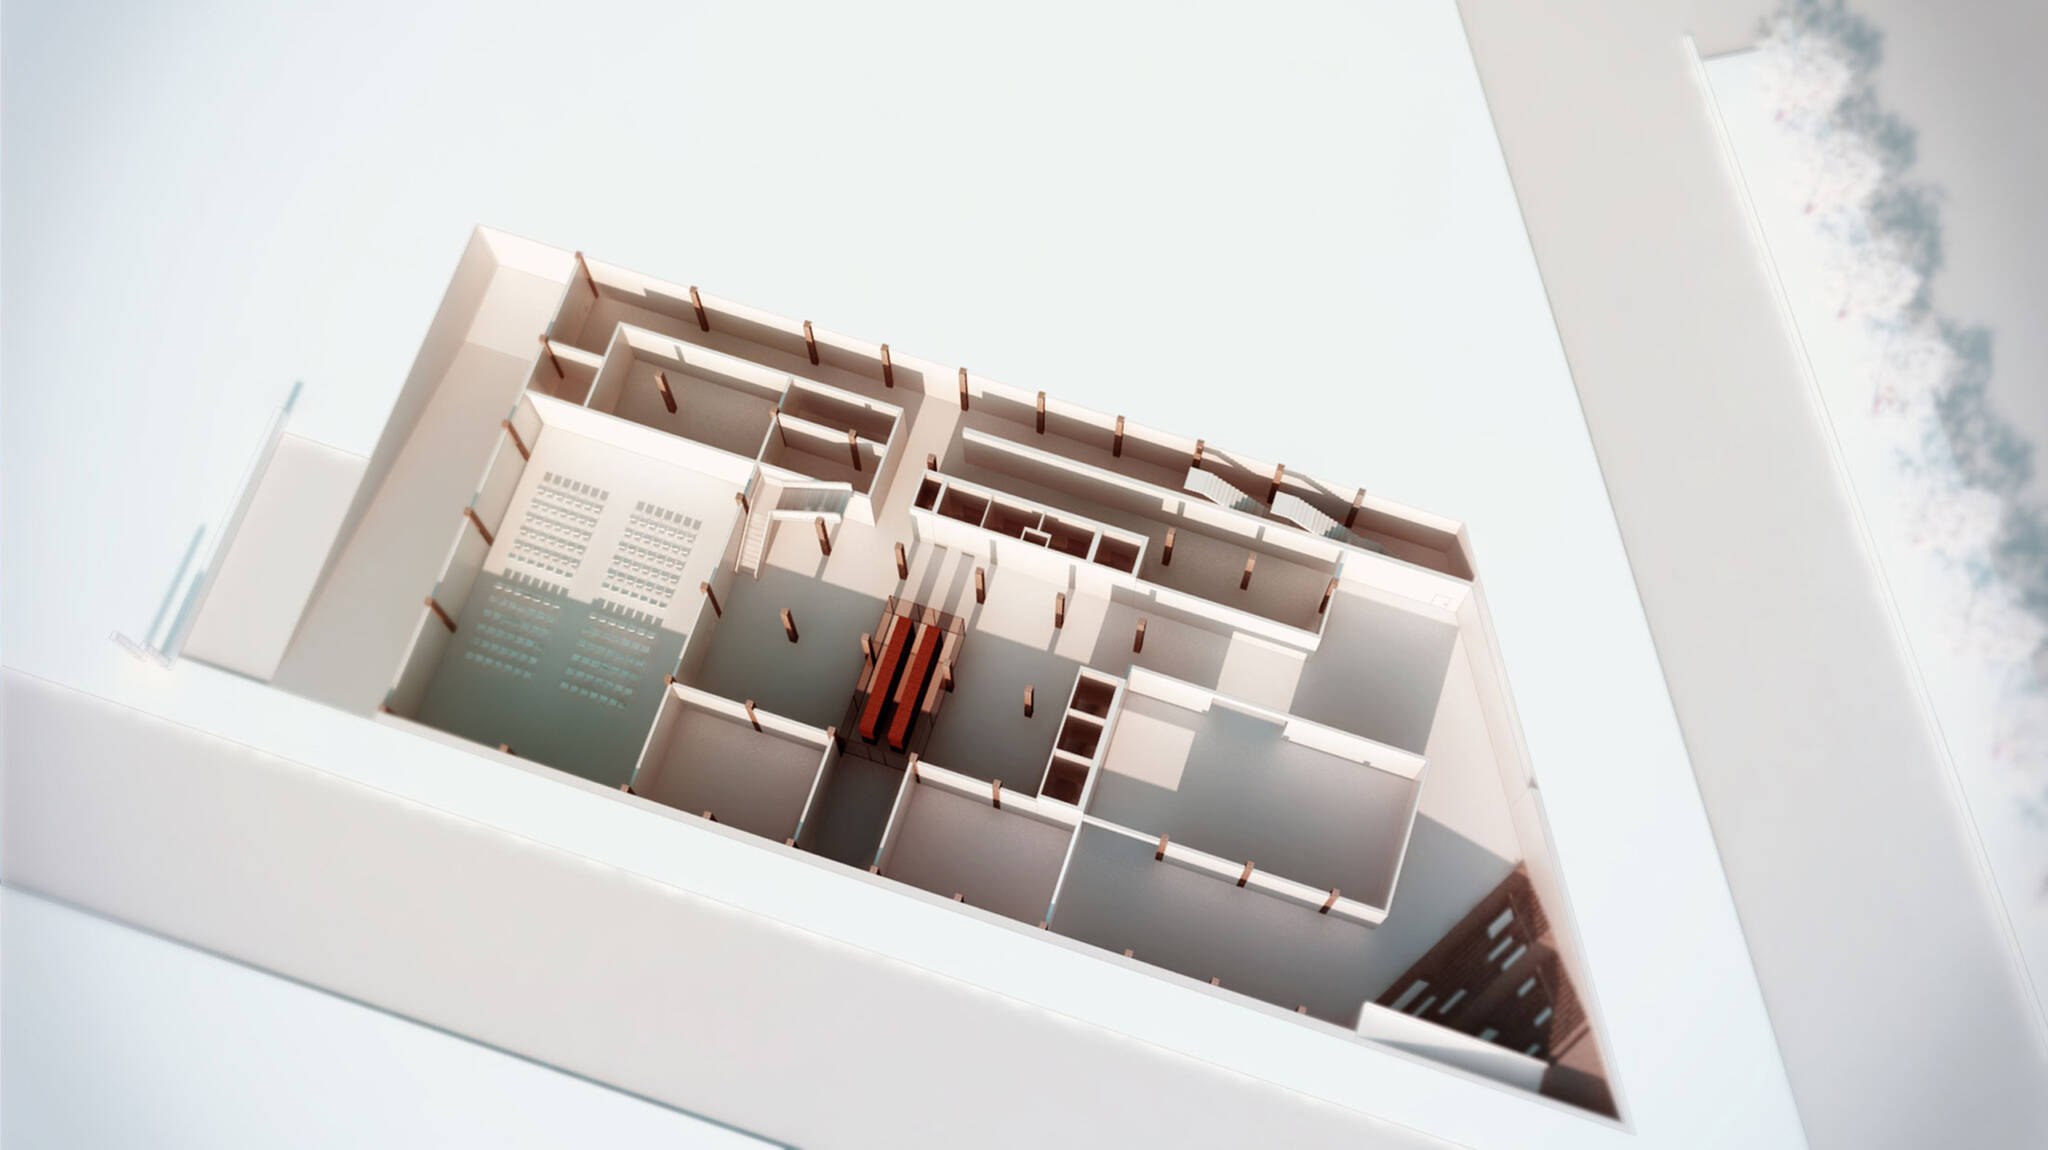 3D floor plan of the American Bible Society project located at the Upper West Side, New York City designed by the architecture studio Danny Forster & Architecture